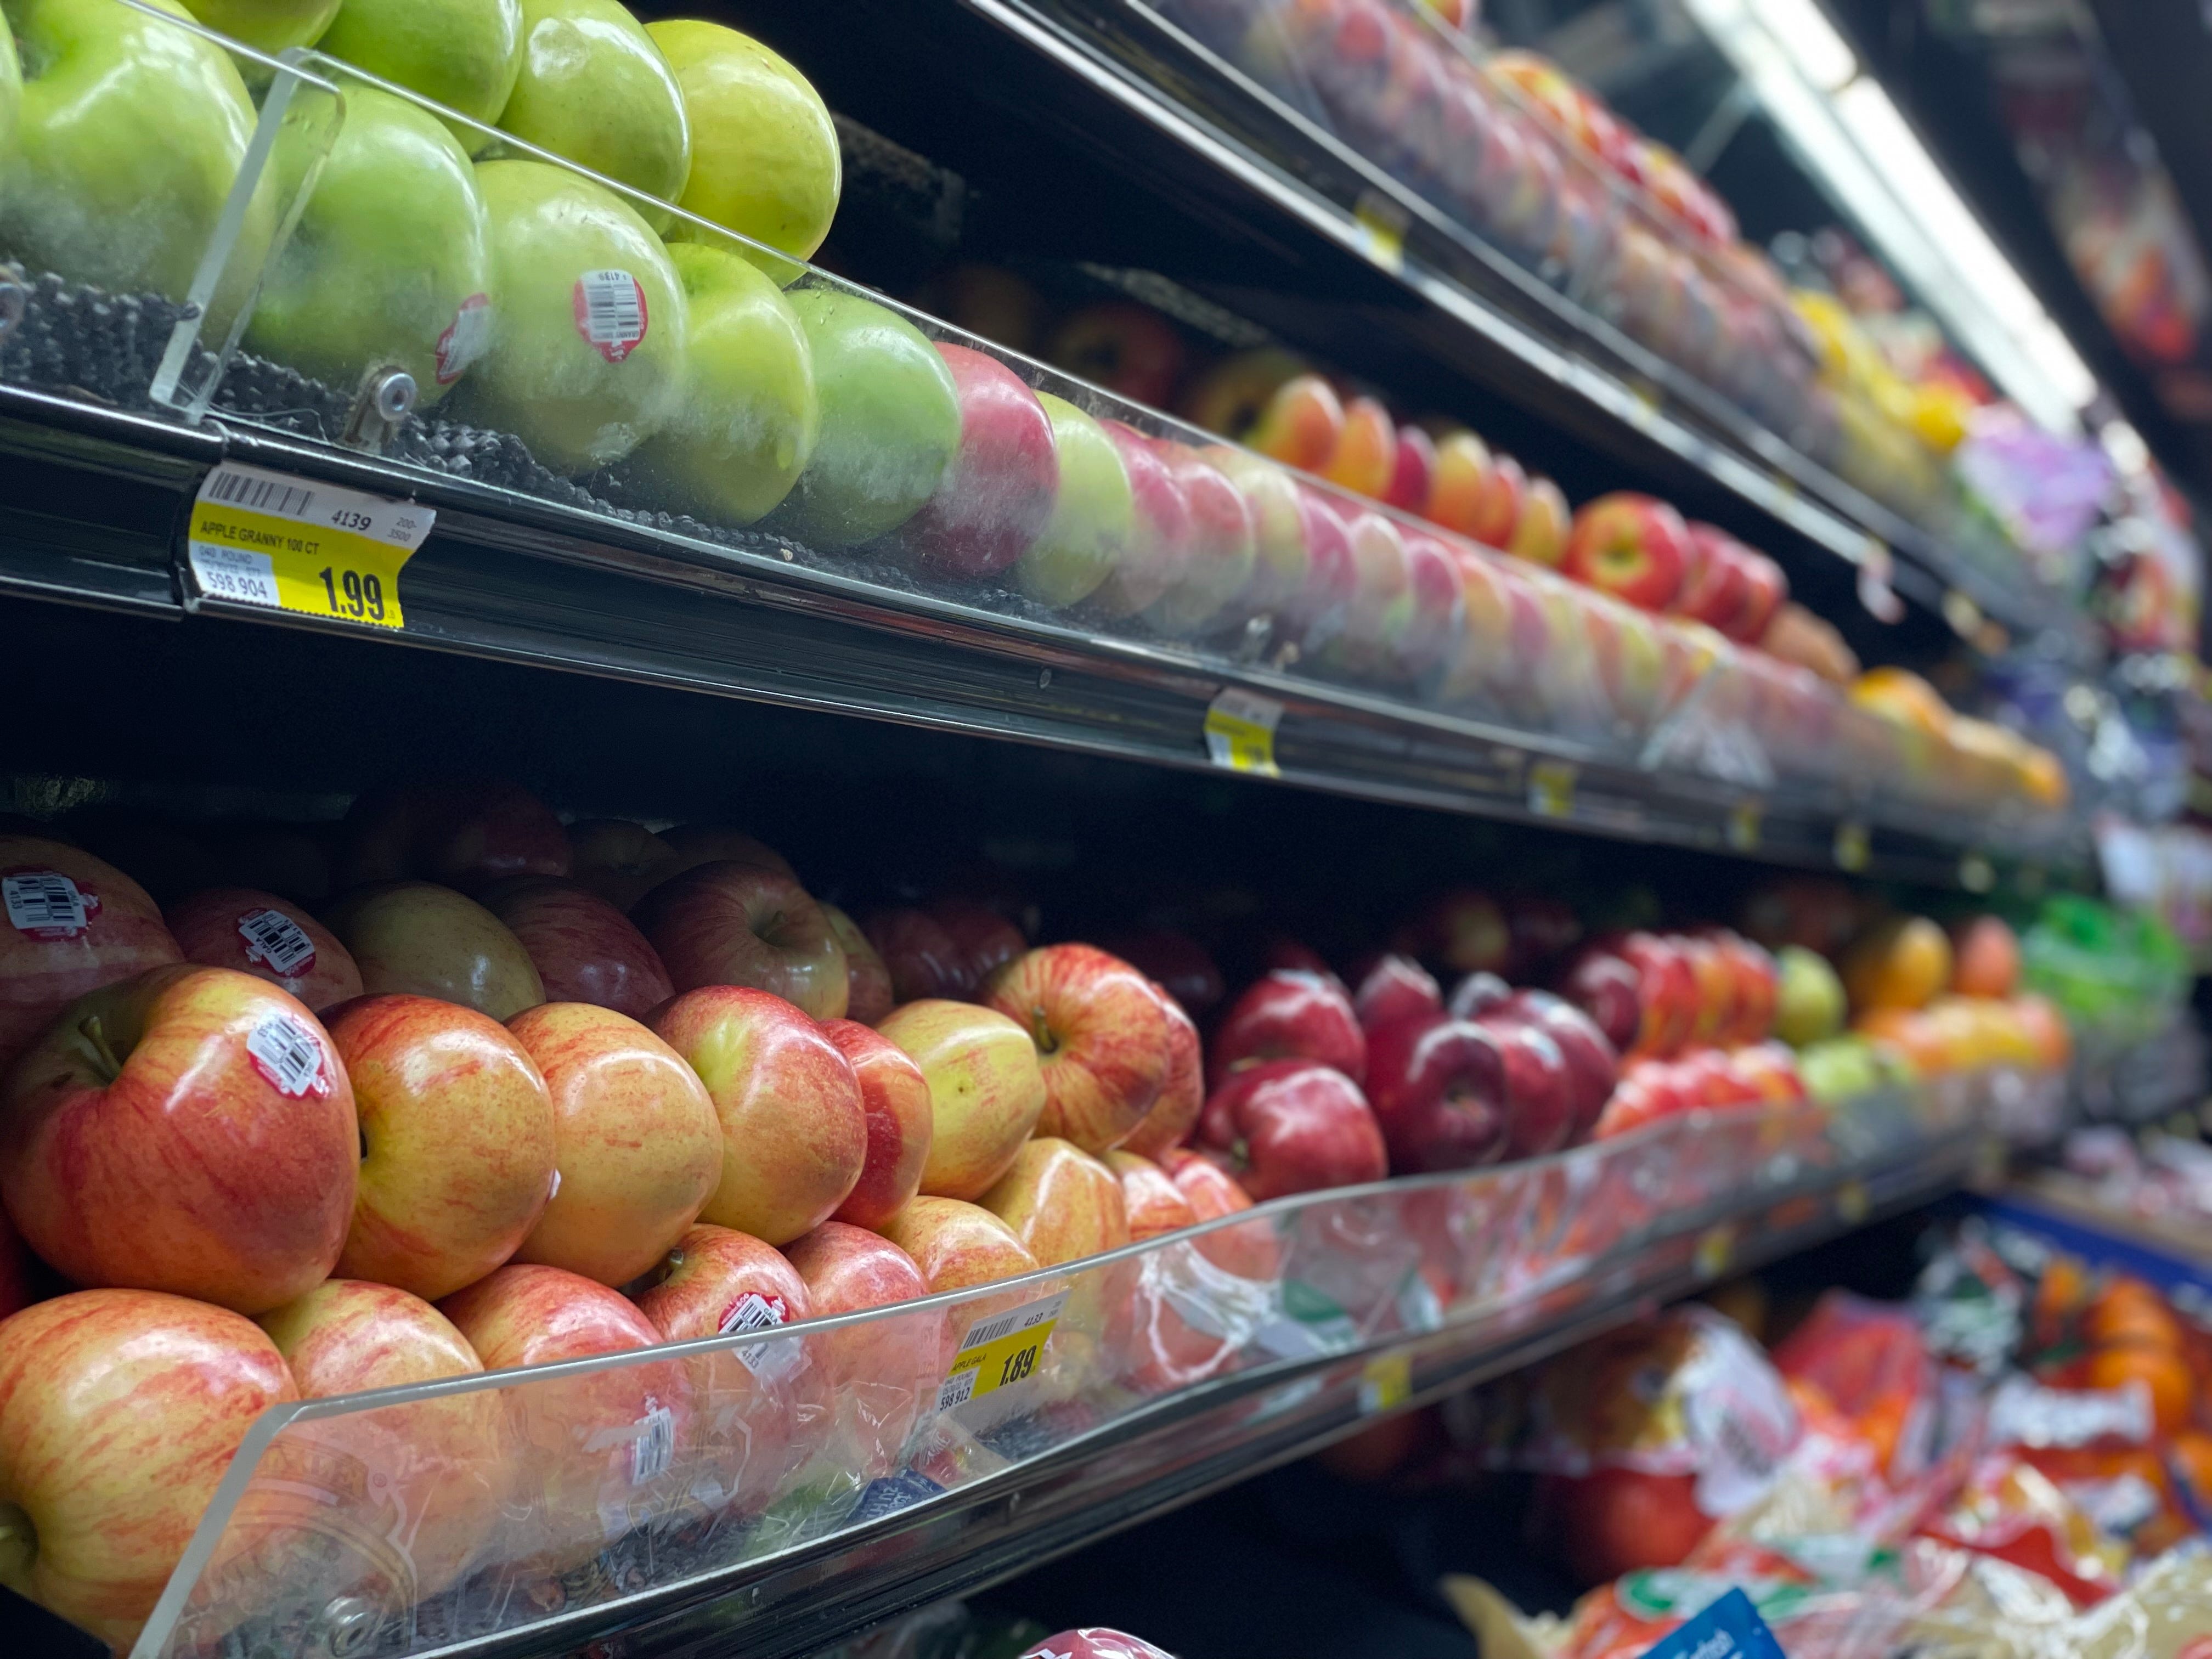 Produce from local growers helps to backfill shelves at grocery stores. Brandon Scholz, president and CEO of the Wisconsin Grocers Association says some grocers are only receiving 60% of their orders due to supply chain issues.